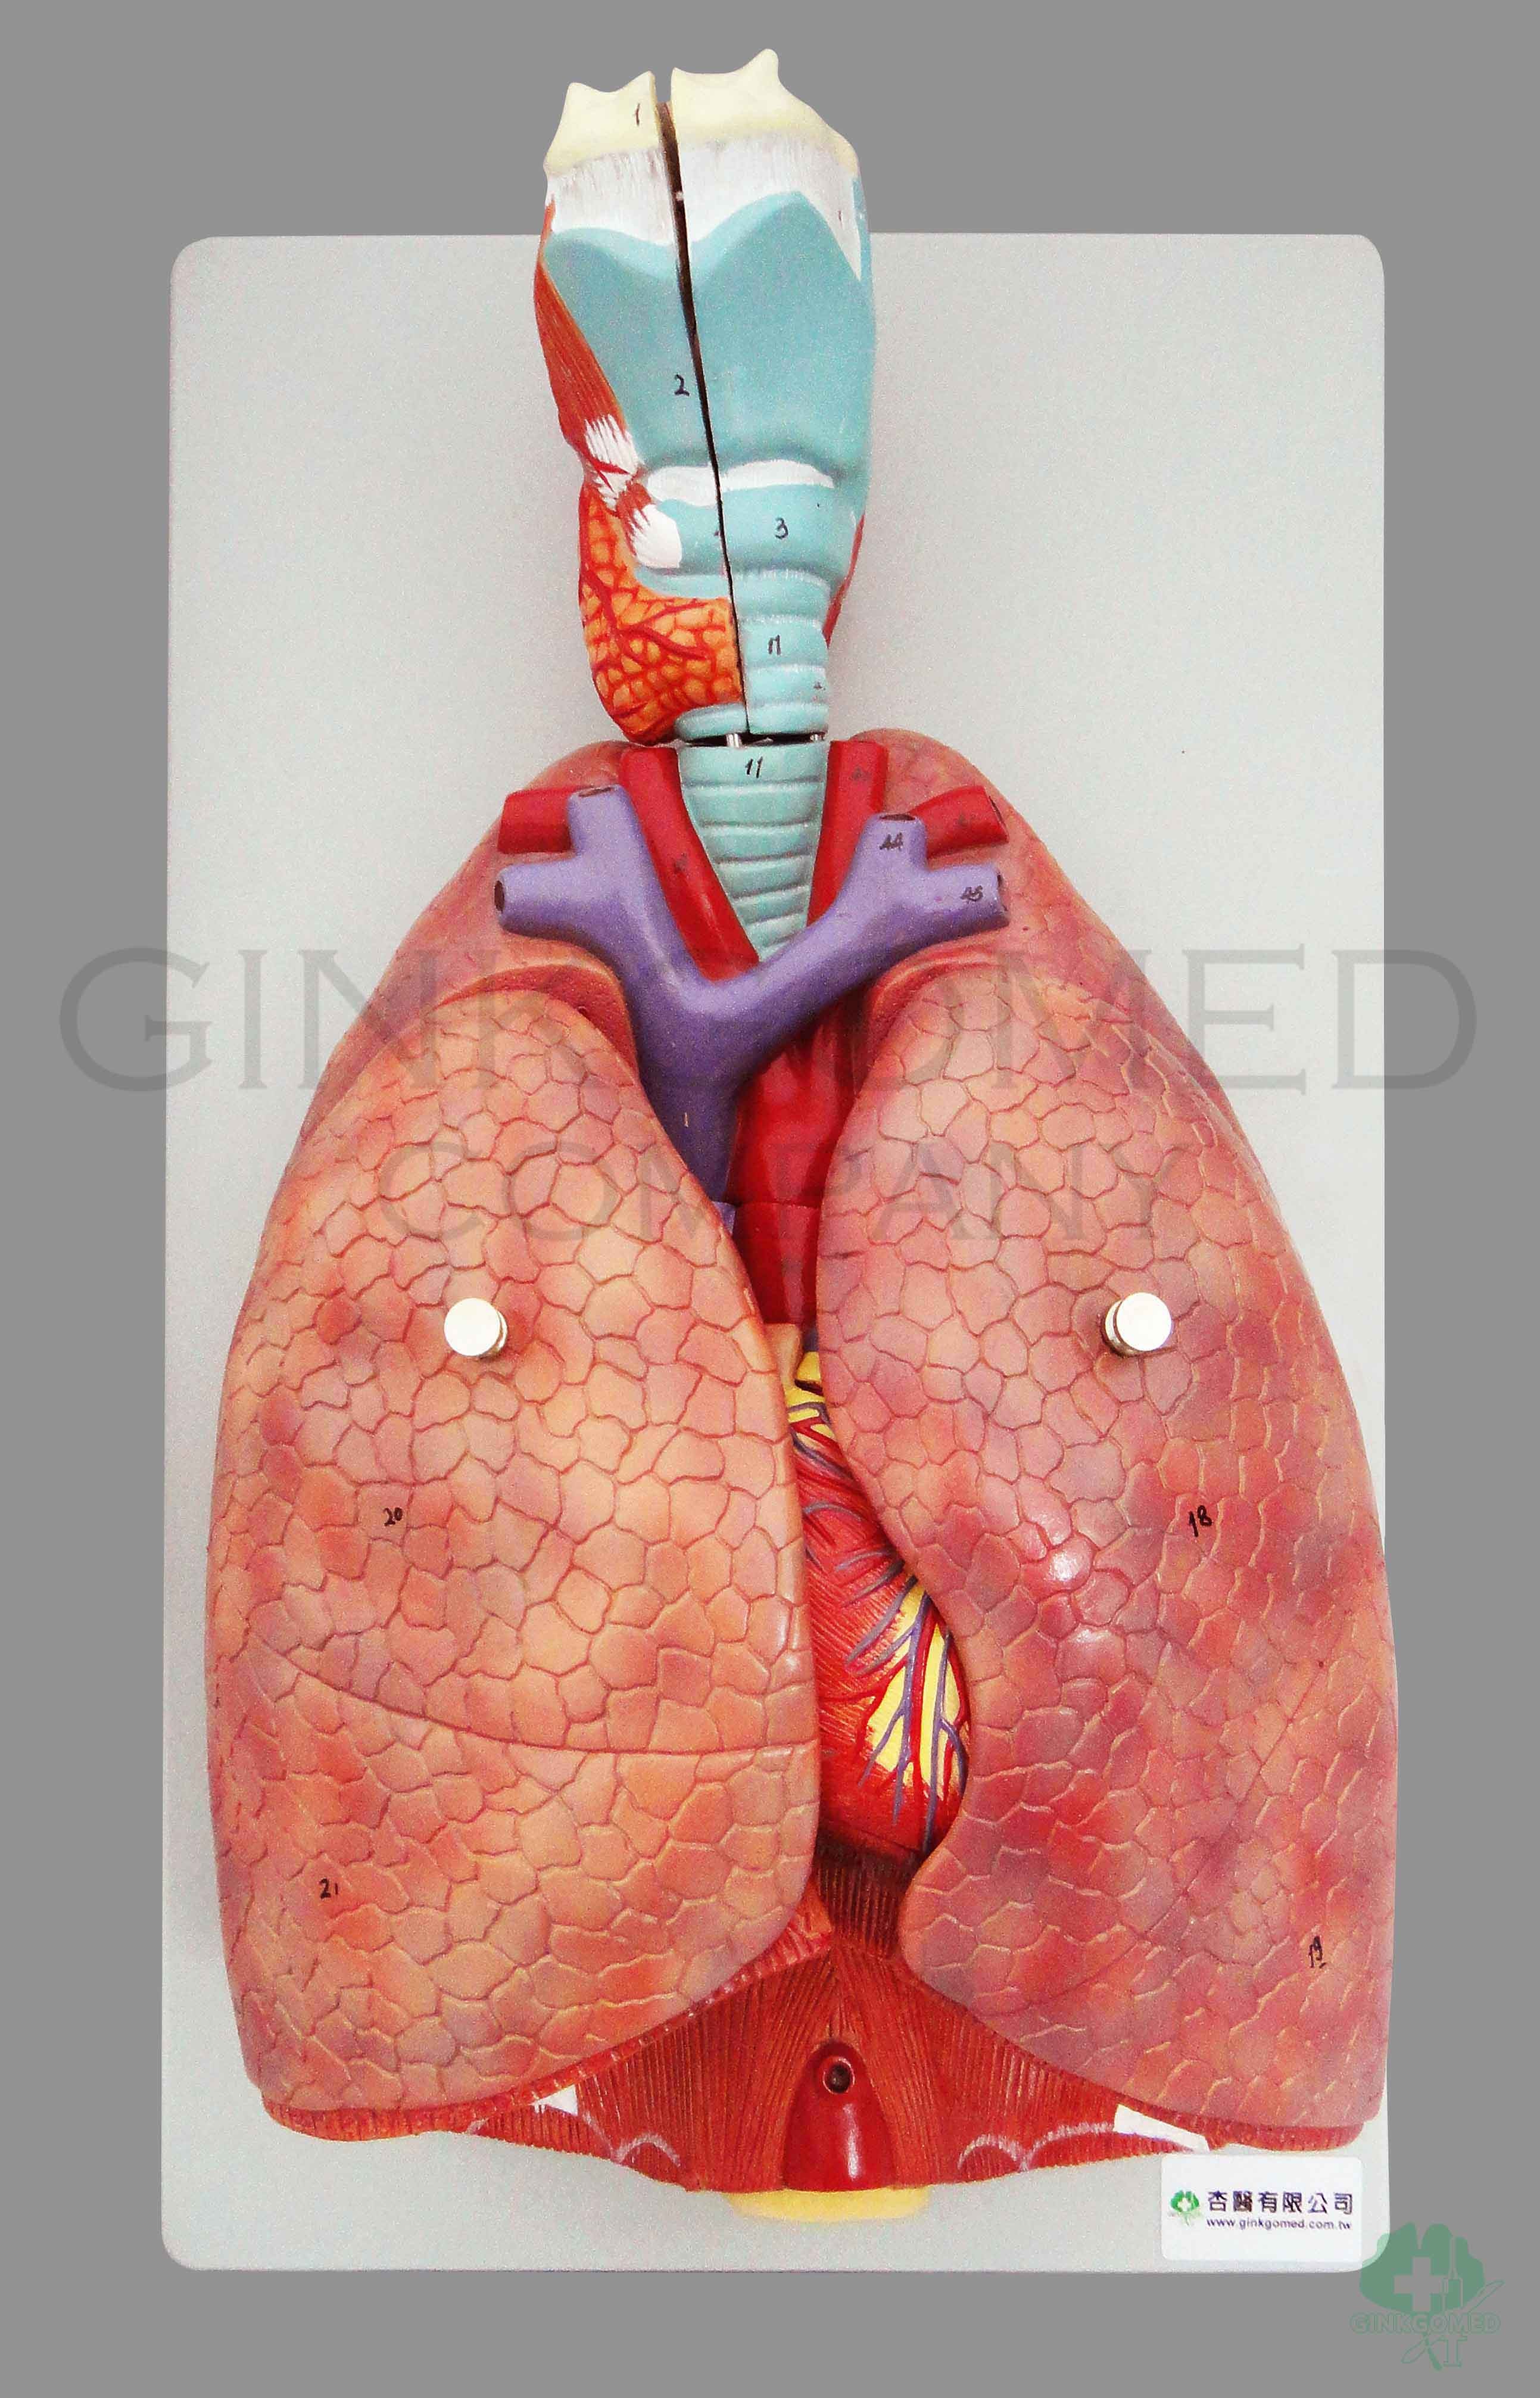 GM-050004  Lungs and Heart with Larynx